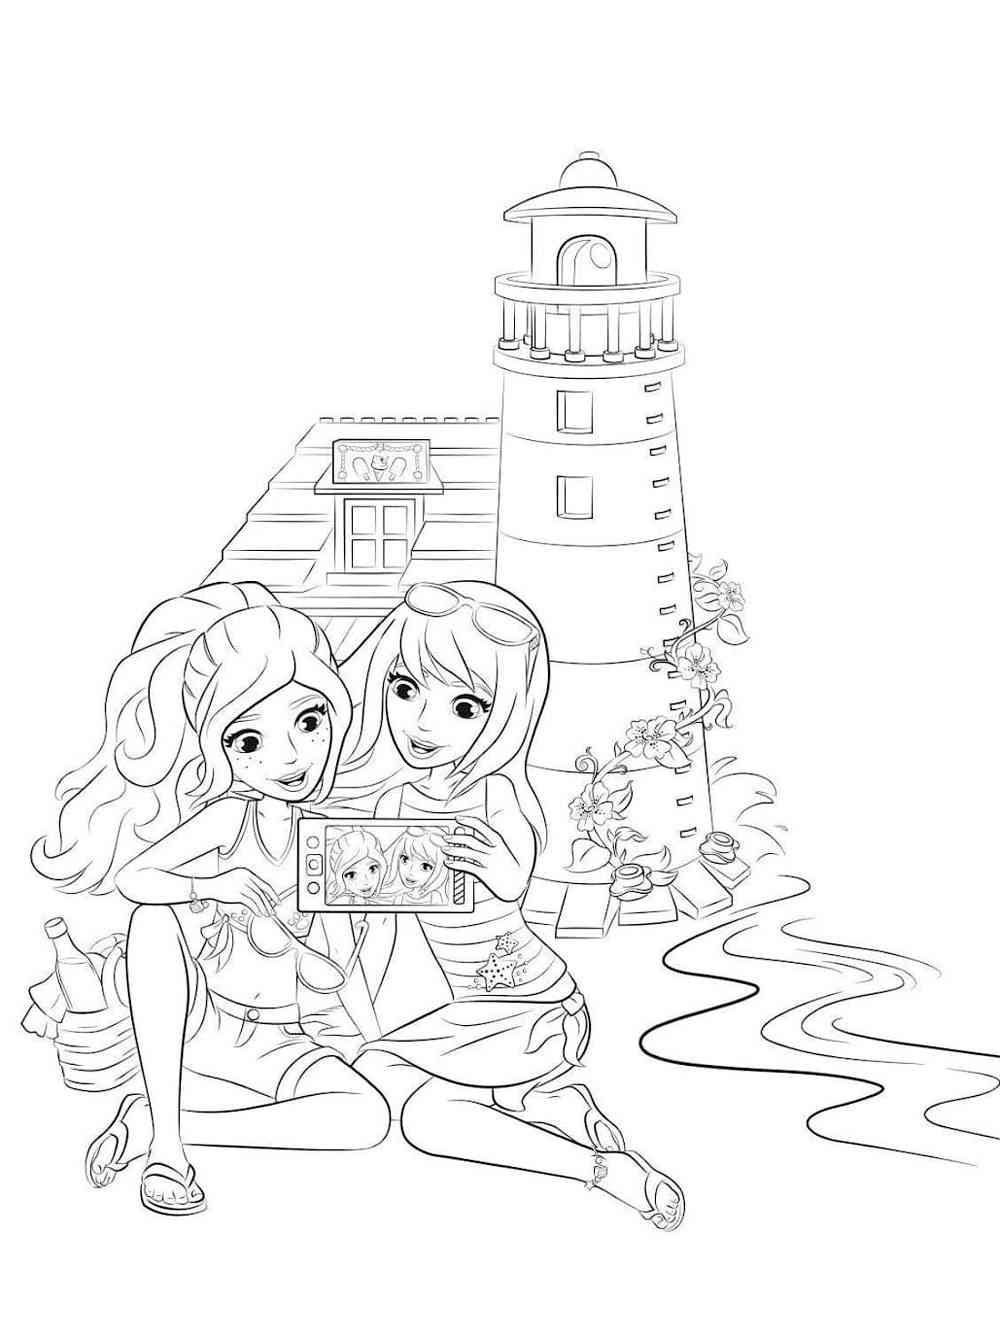 Lego Friends coloring pages. Free Printable Lego Friends coloring ...